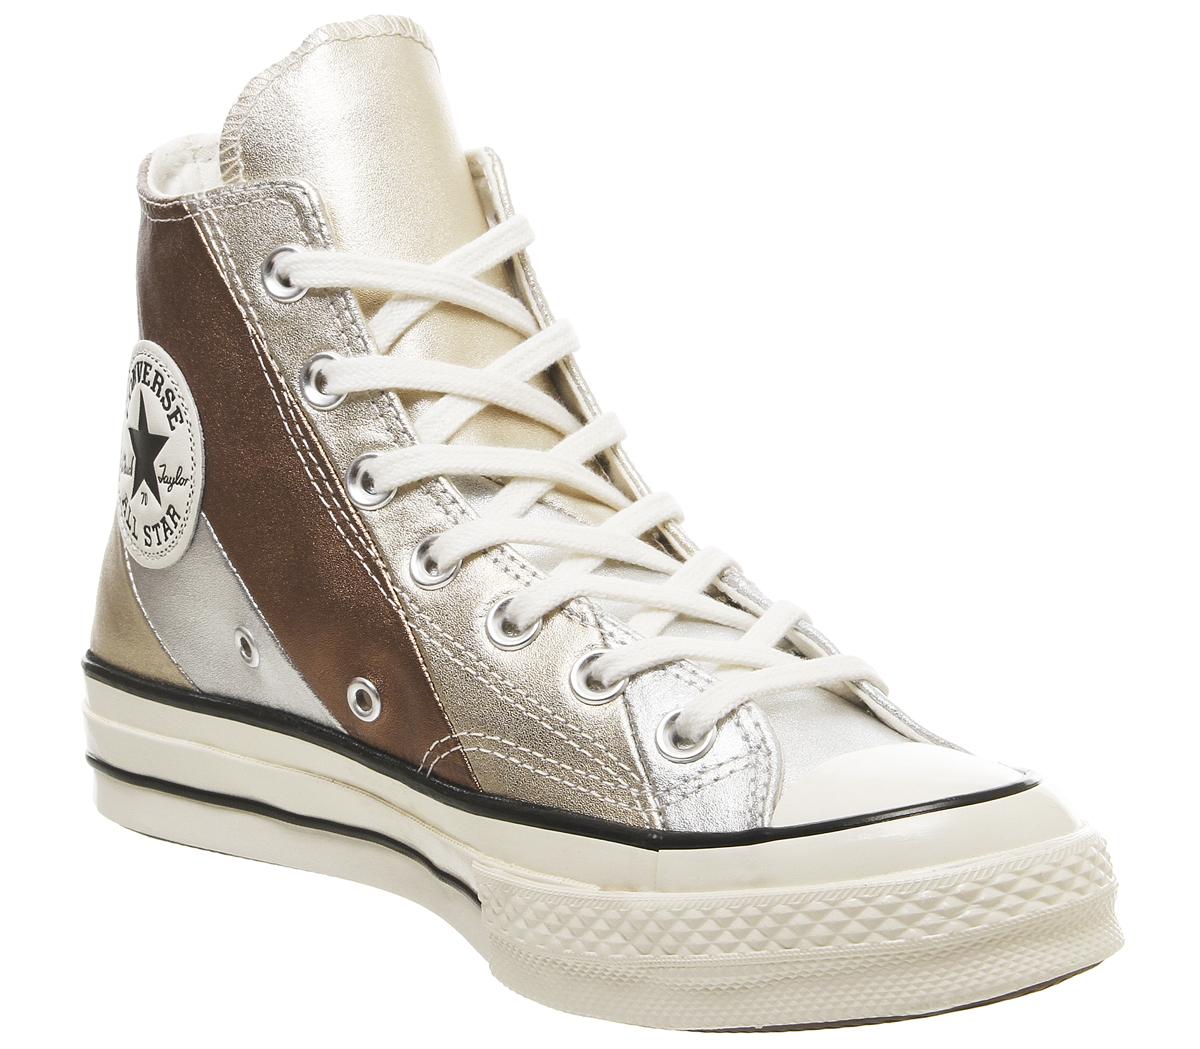 converse all star hi 70's leather